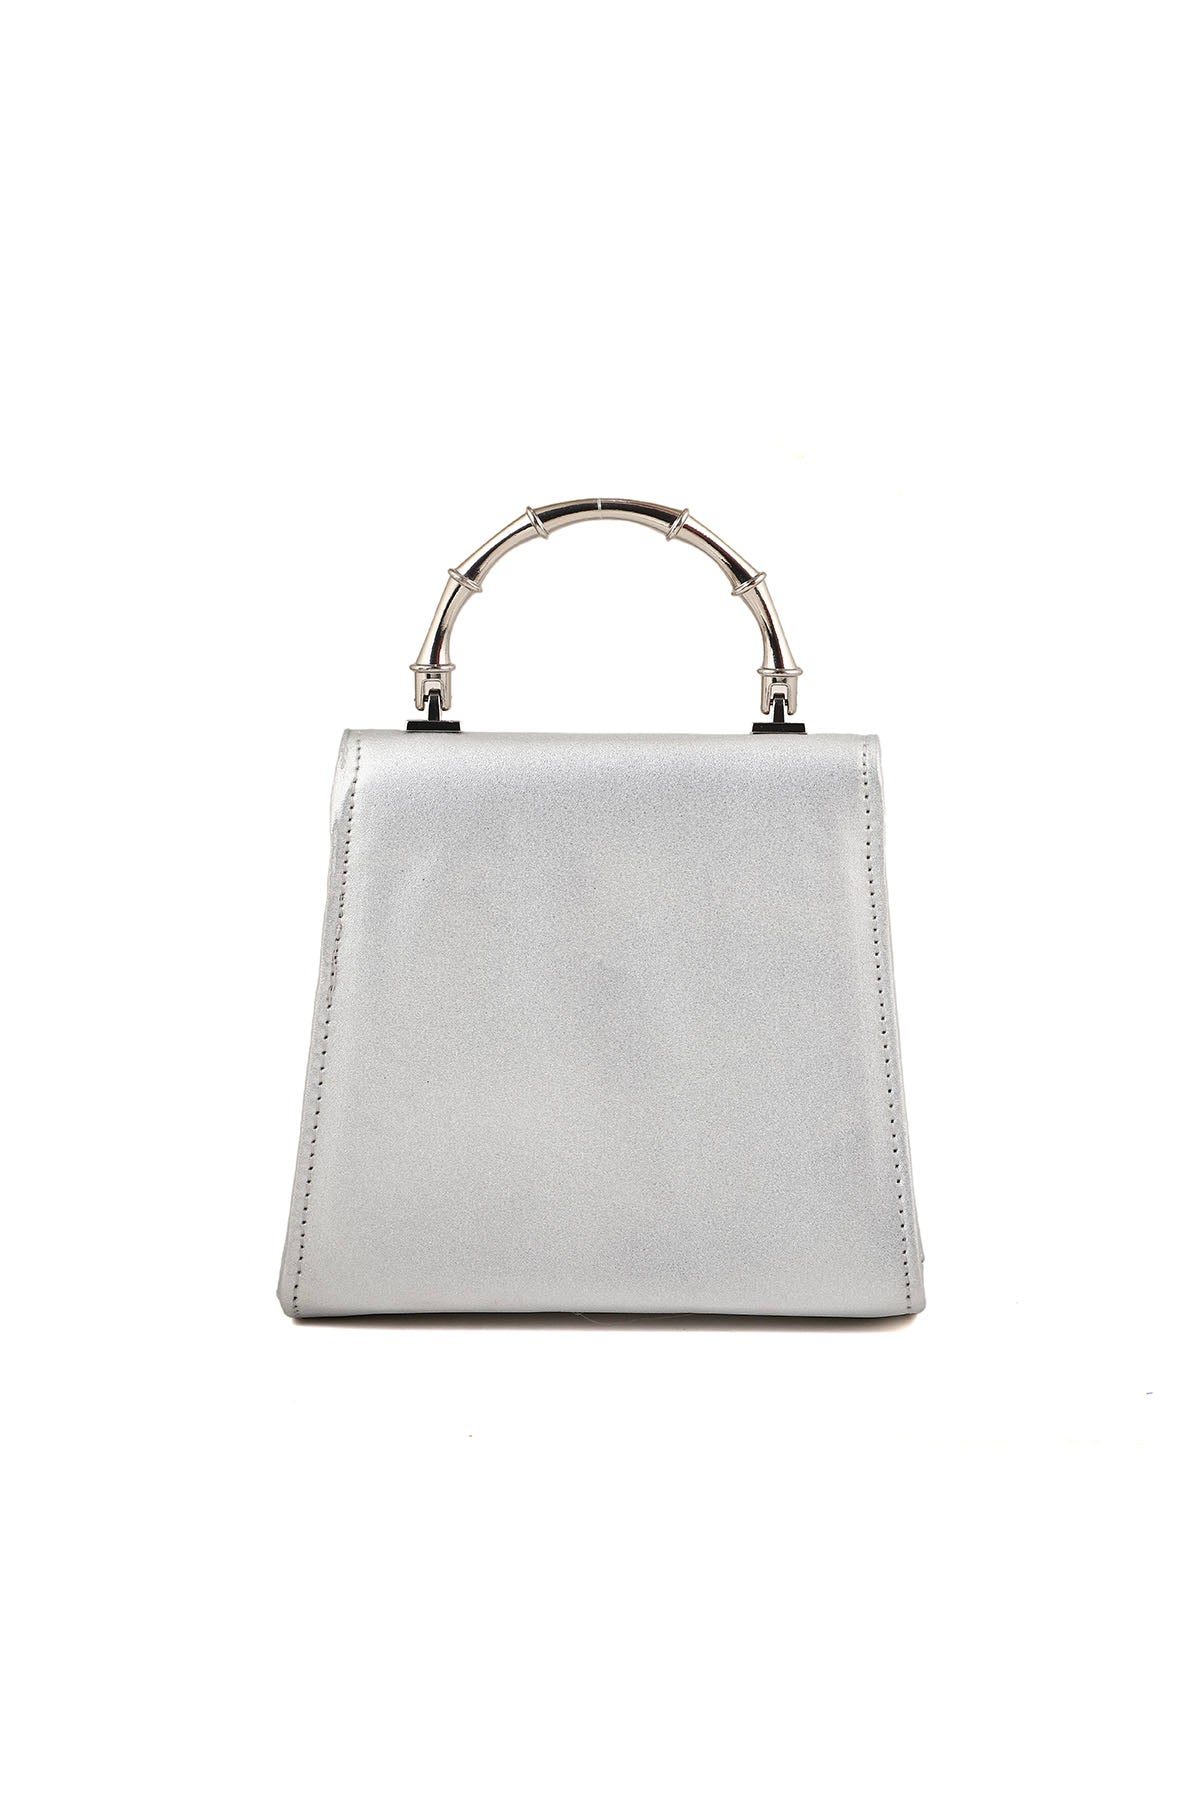 Top Handle Hand Bags B21592-Silver